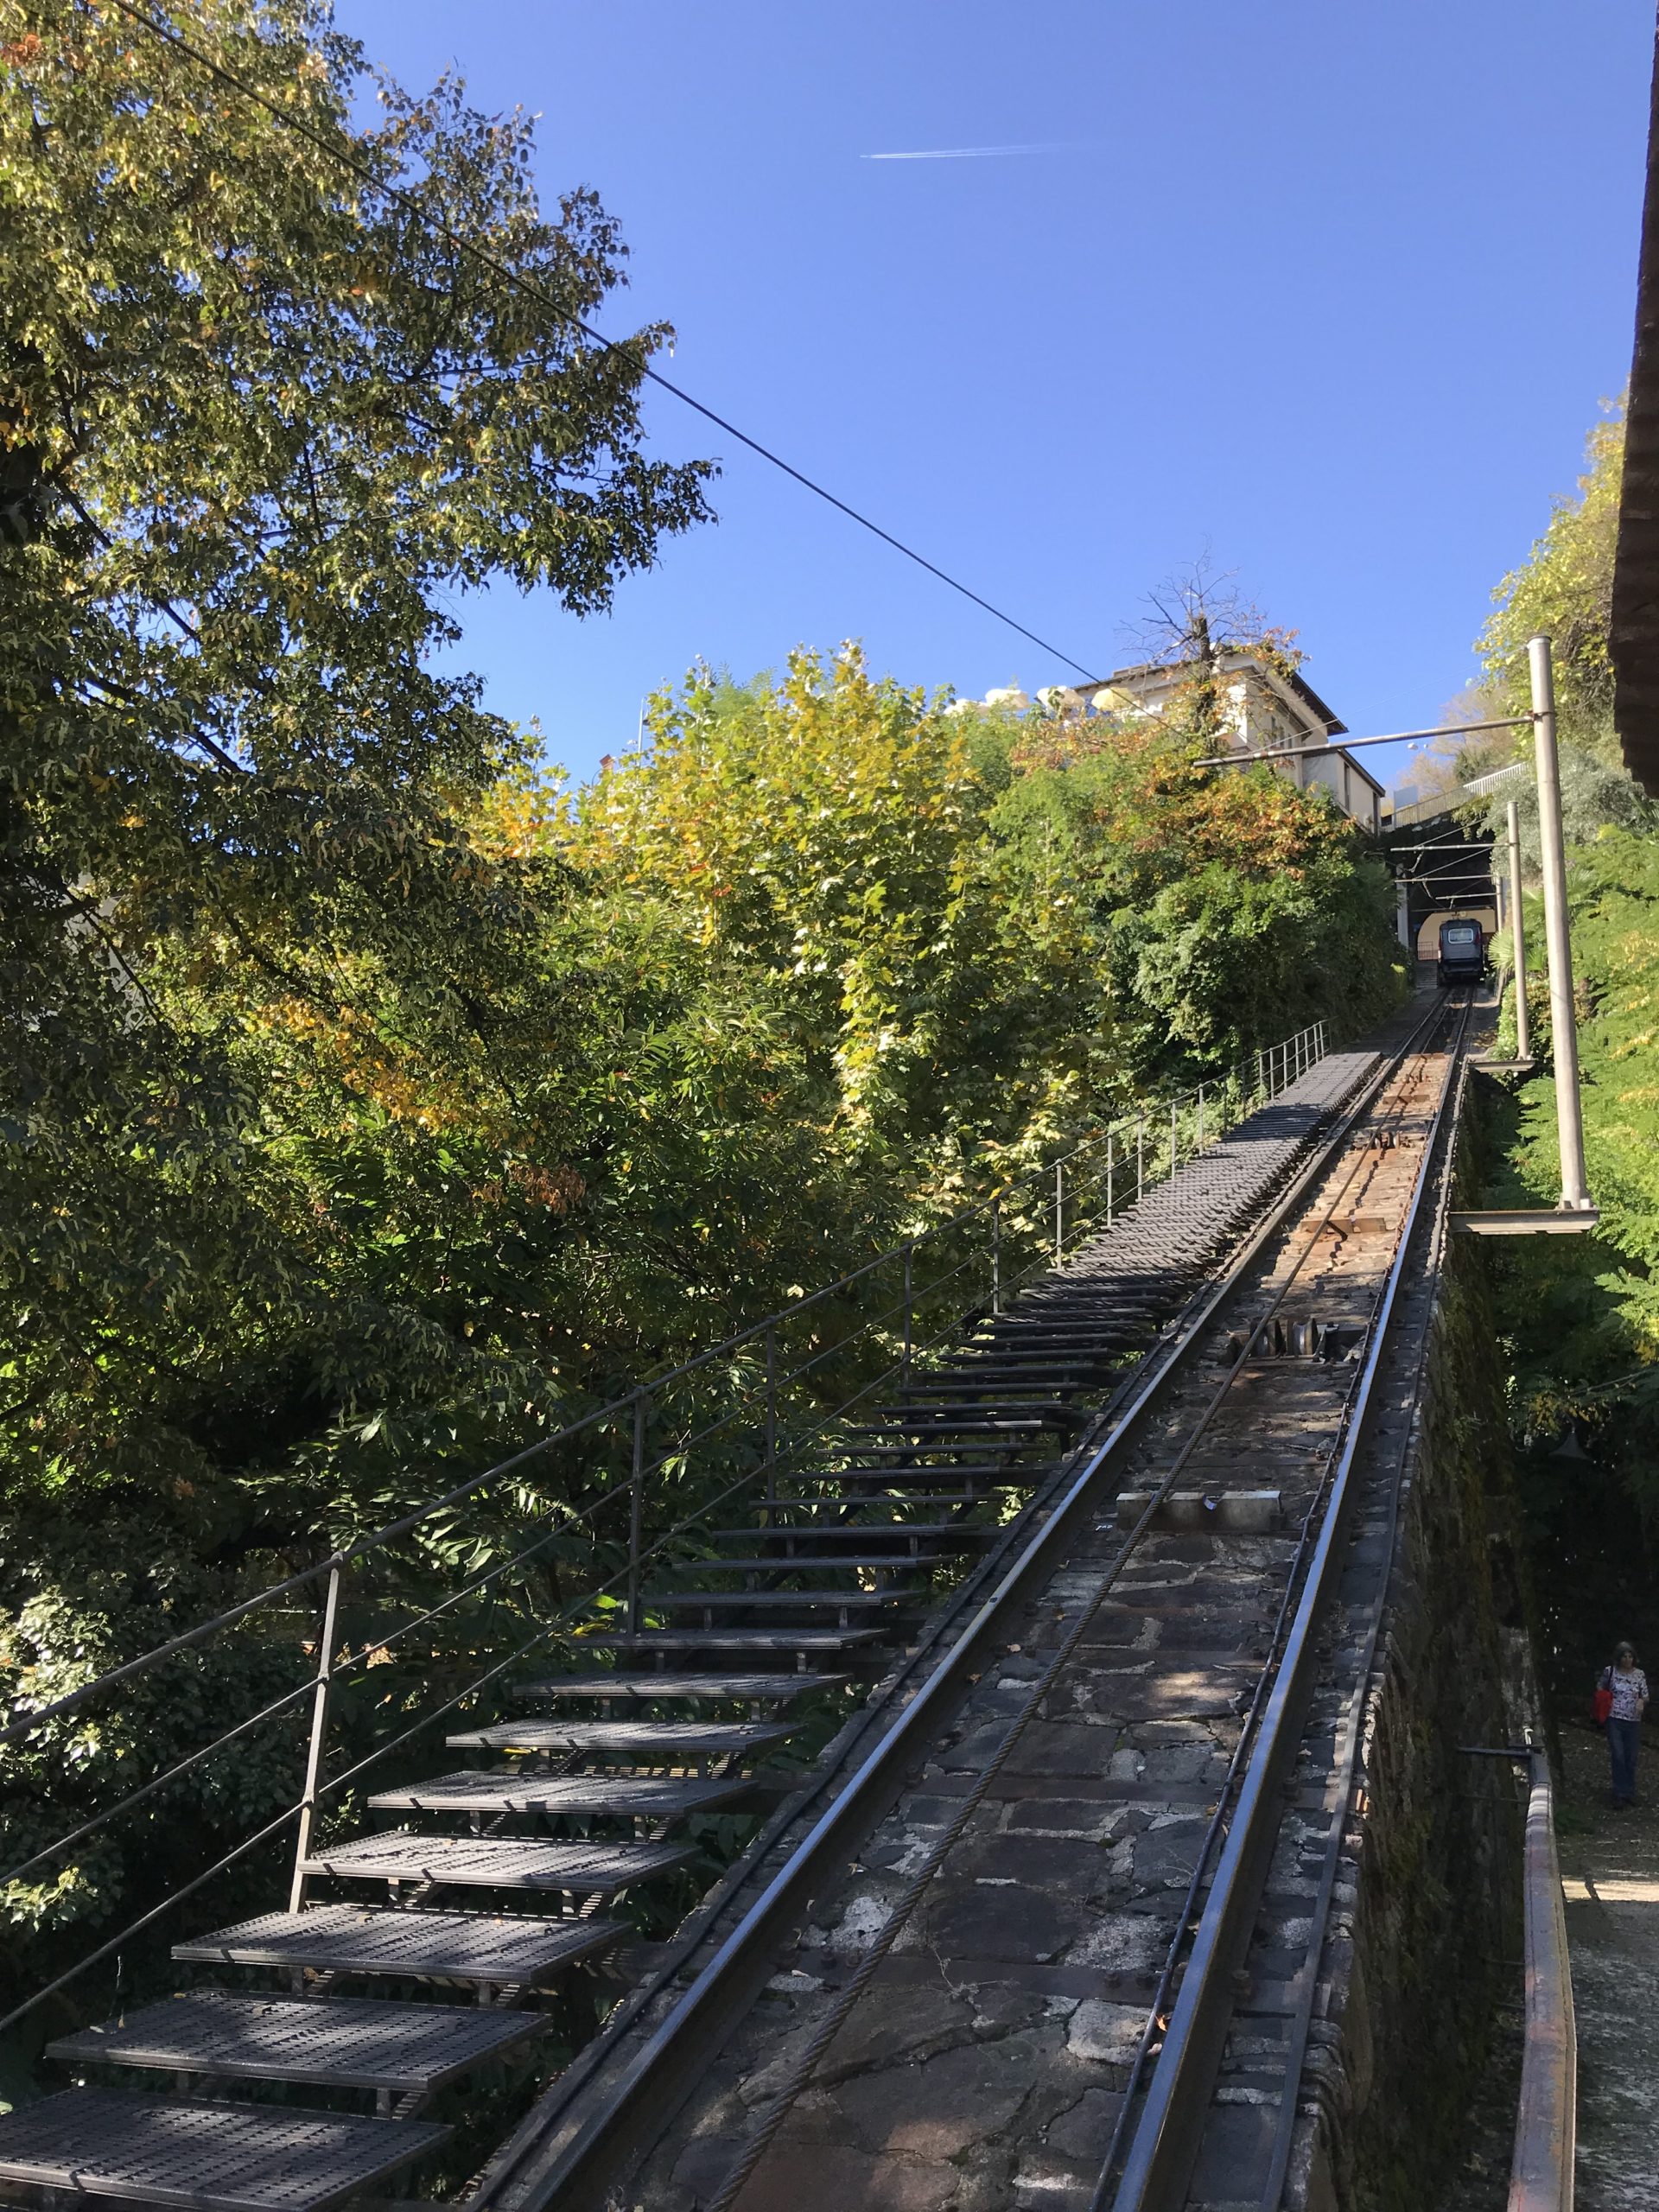 Taking the cable car to go up Mount Madonna del Sasso